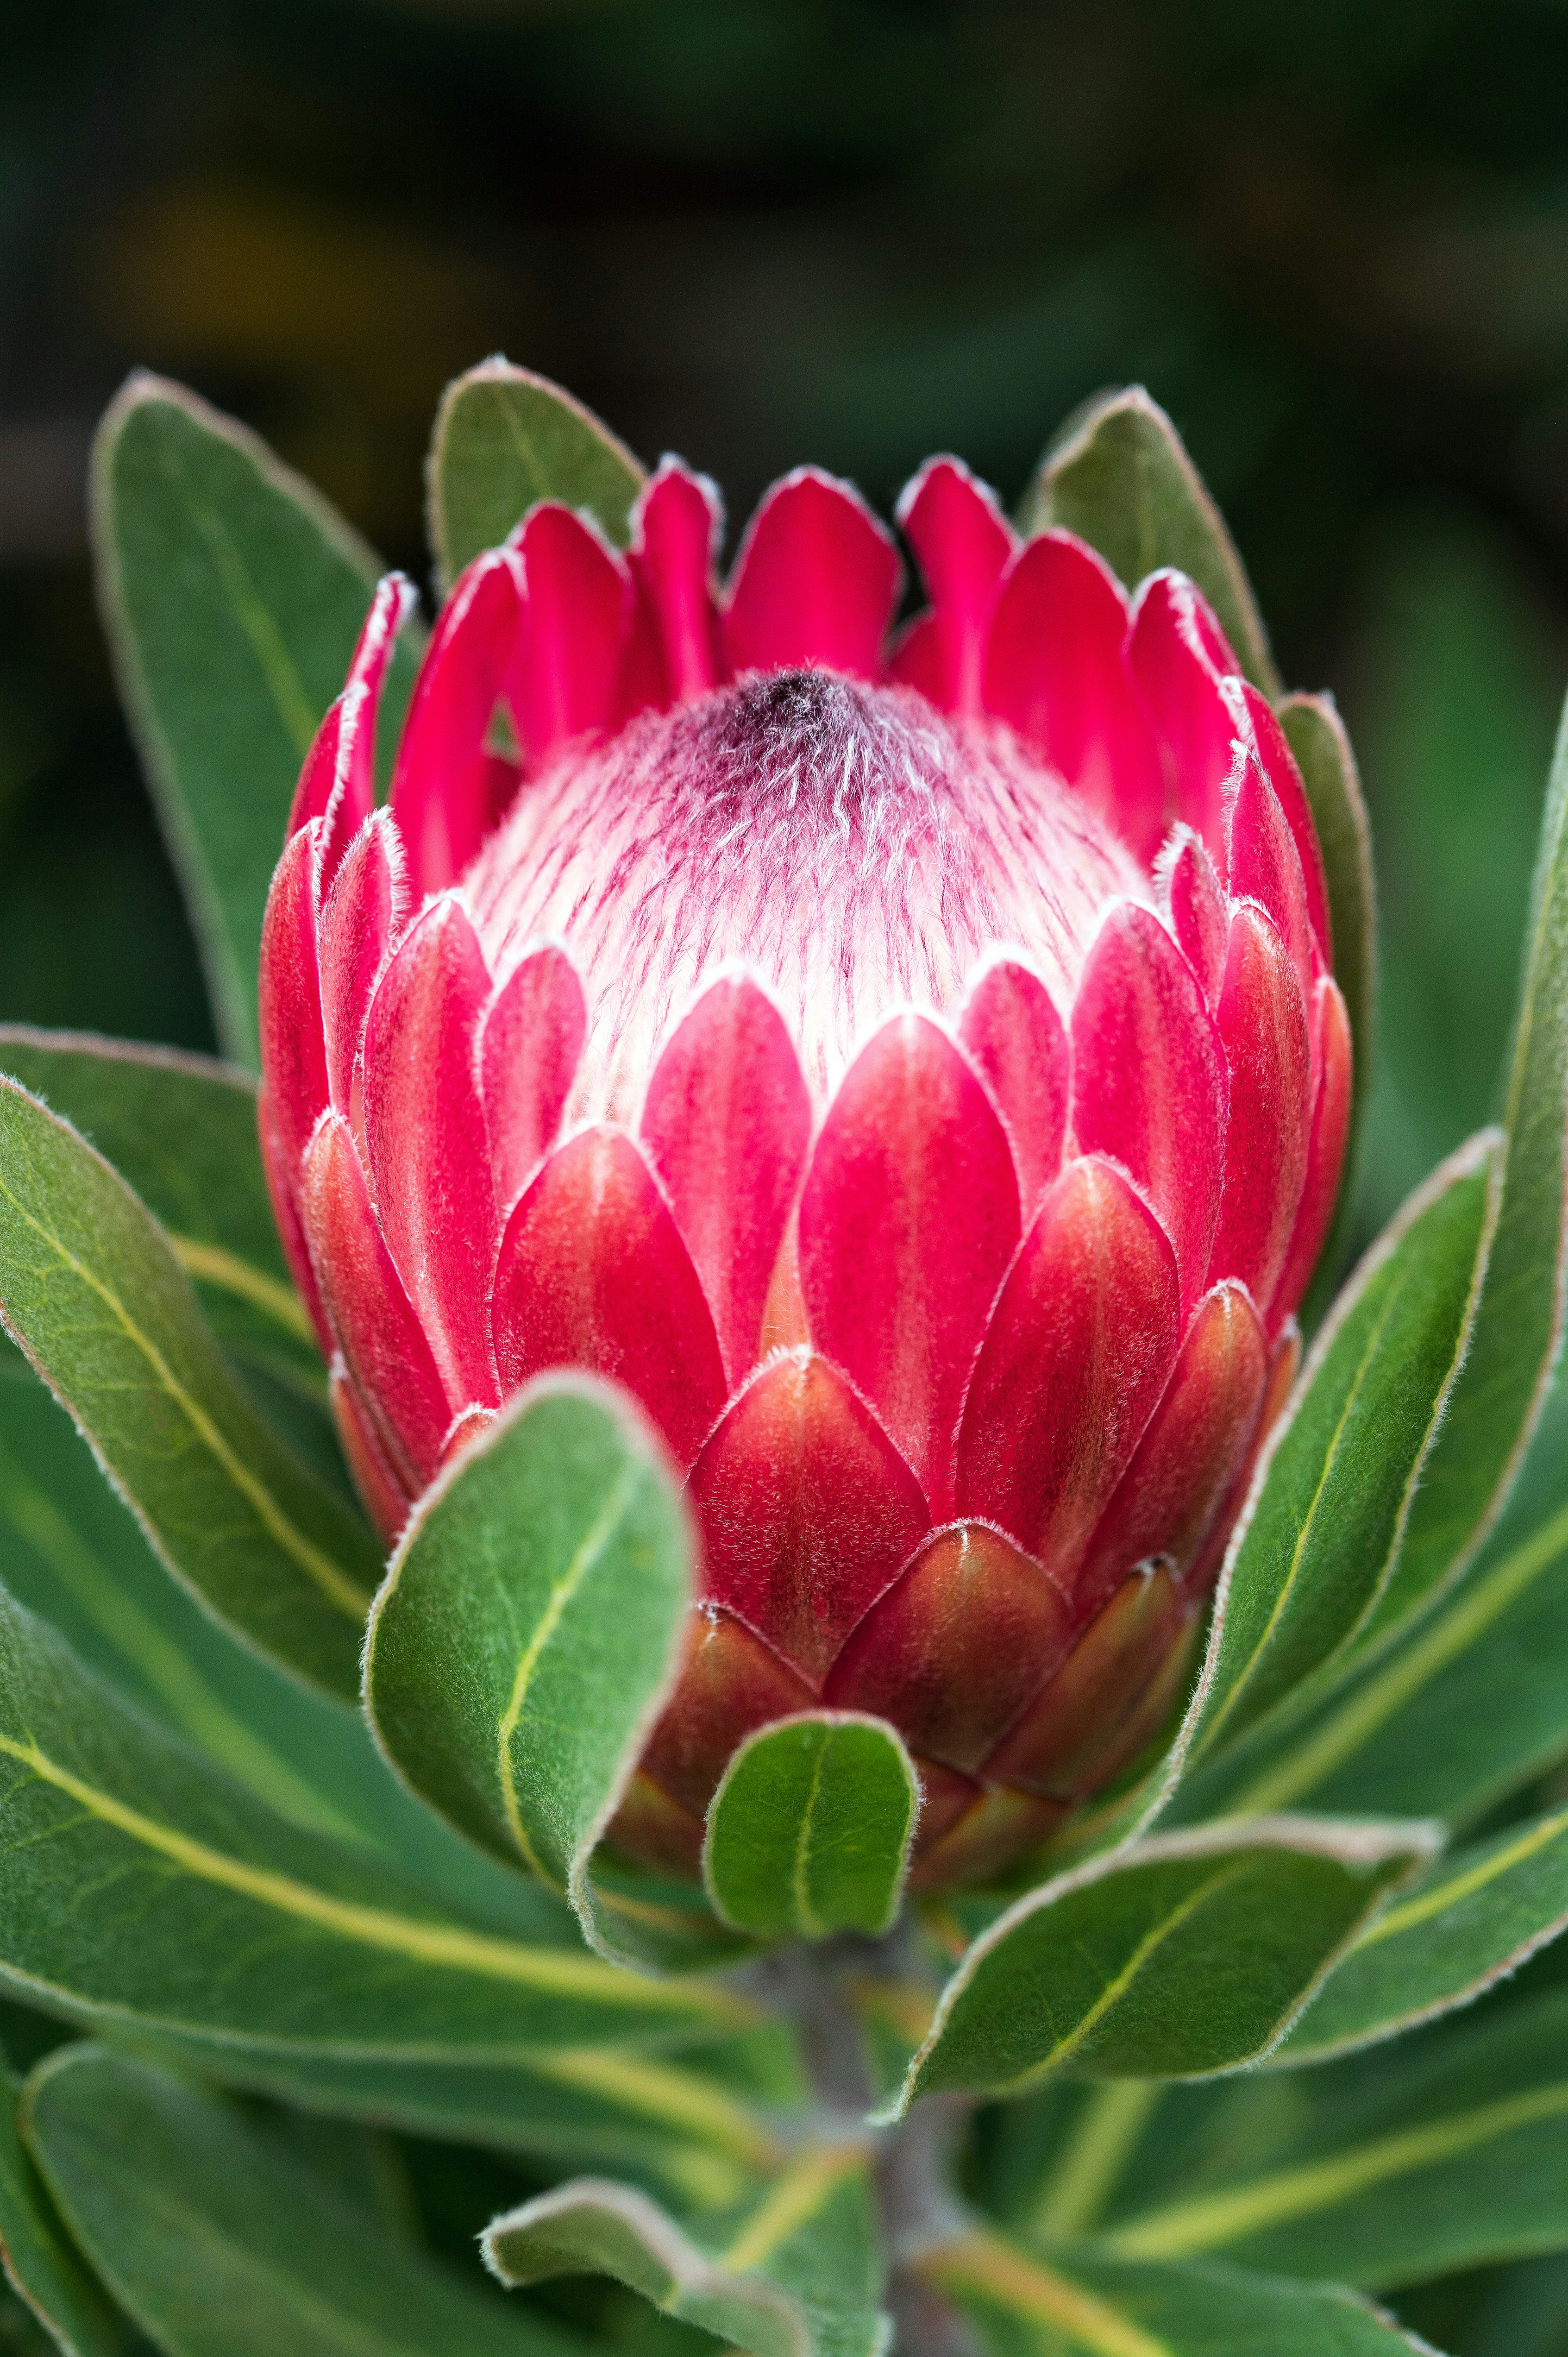 A Pink Protea Flower with Leaves.